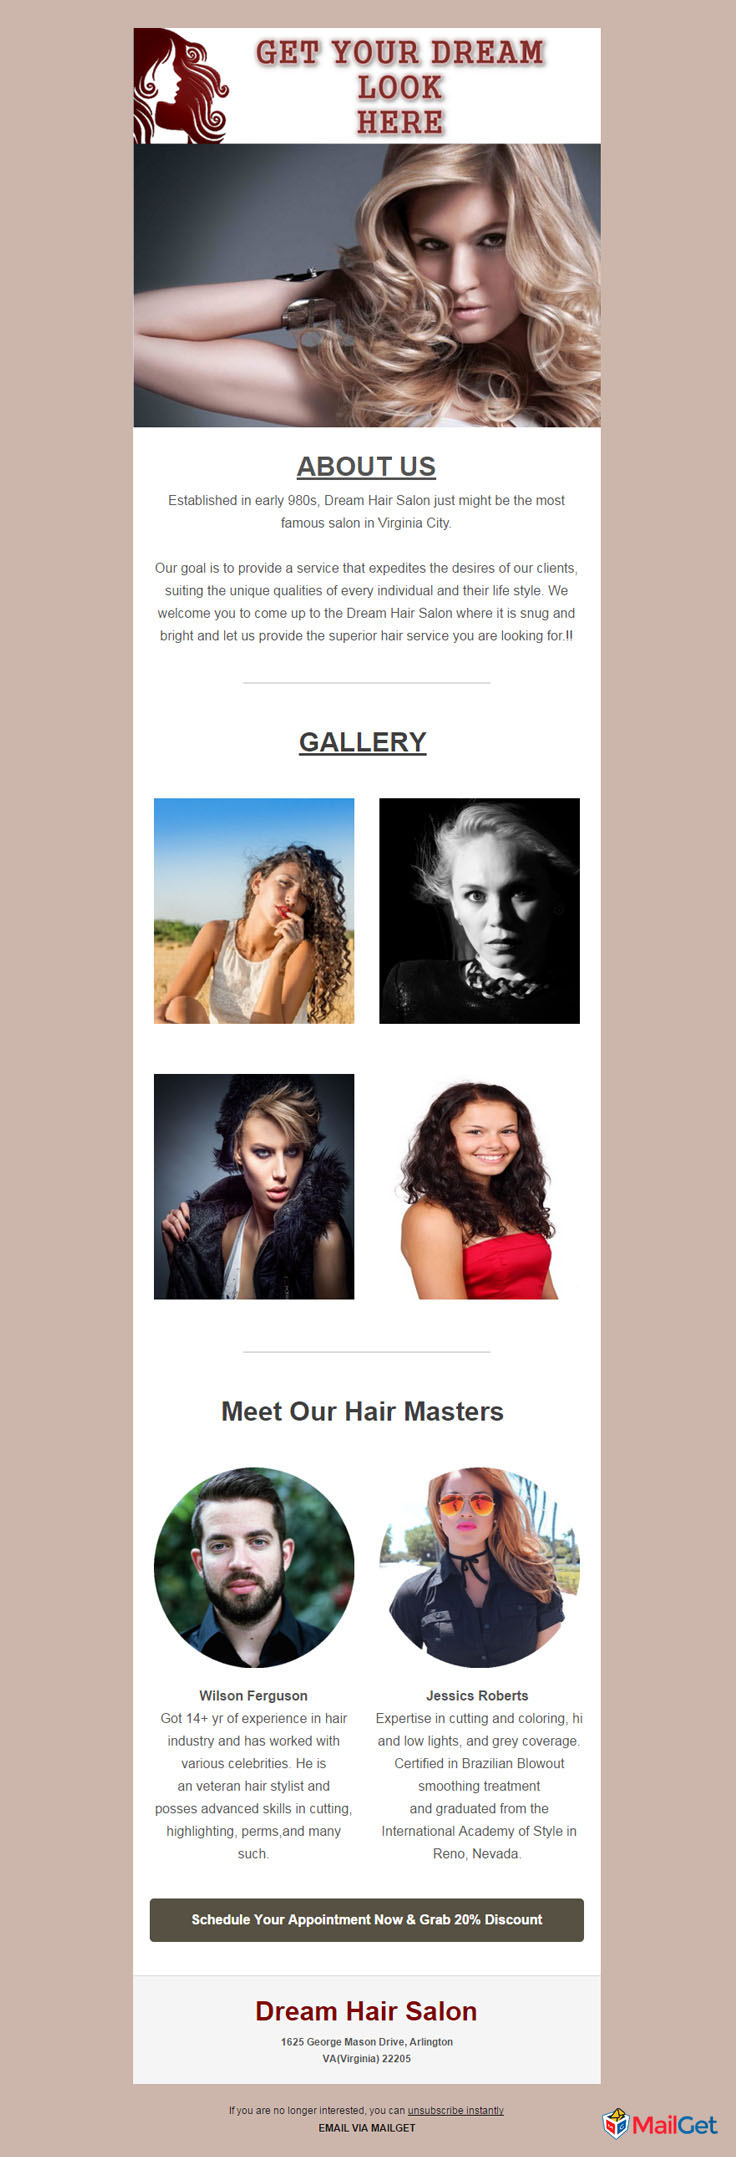 free-hair-salon-email-newsletter-templates-6-MailGet